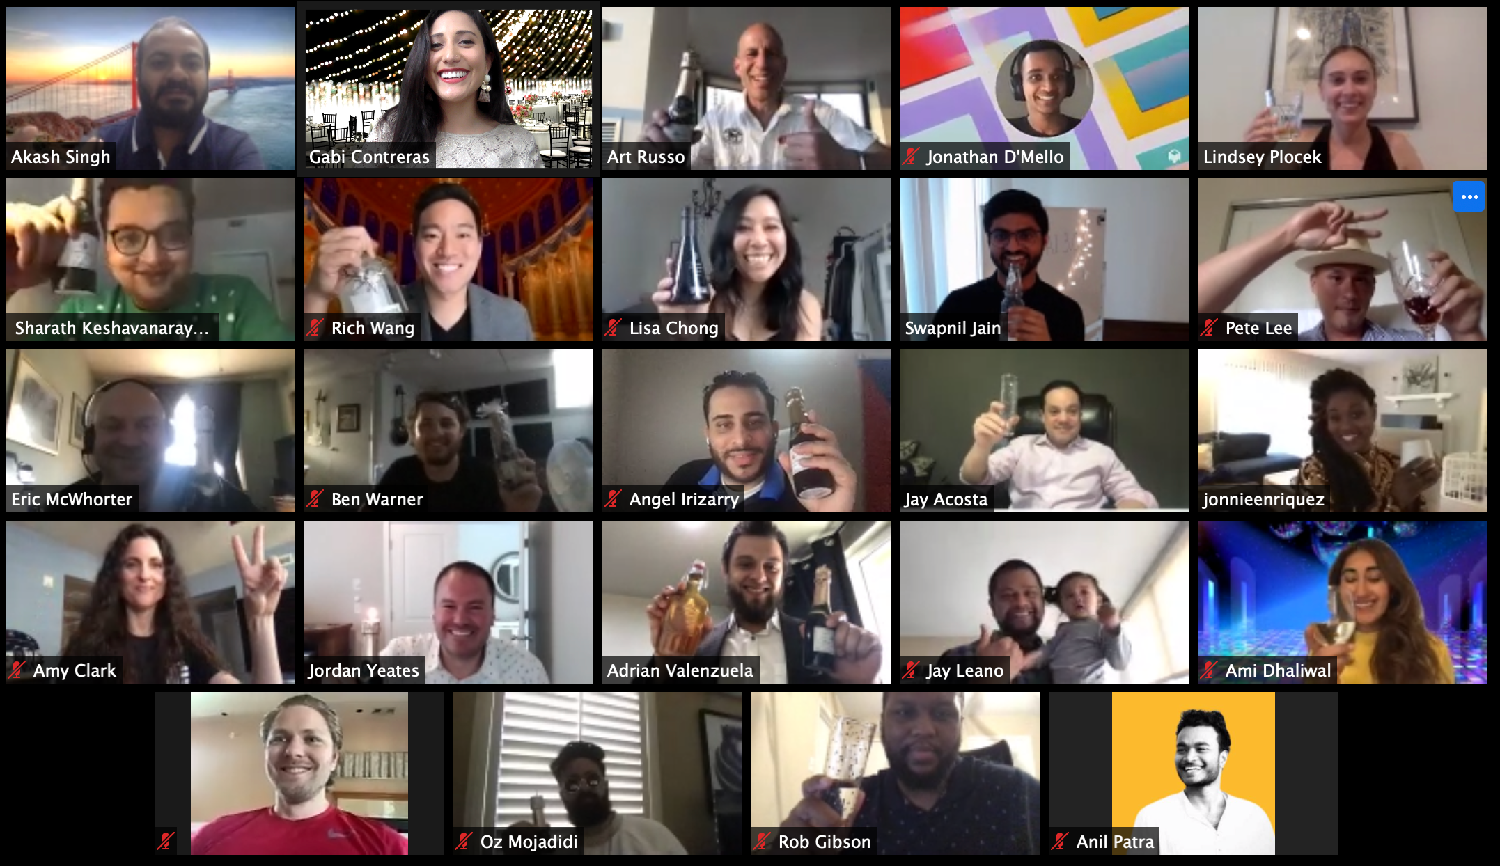 Our team celebrates our 3 year birthday virtually. We all dressed up for the occasion!